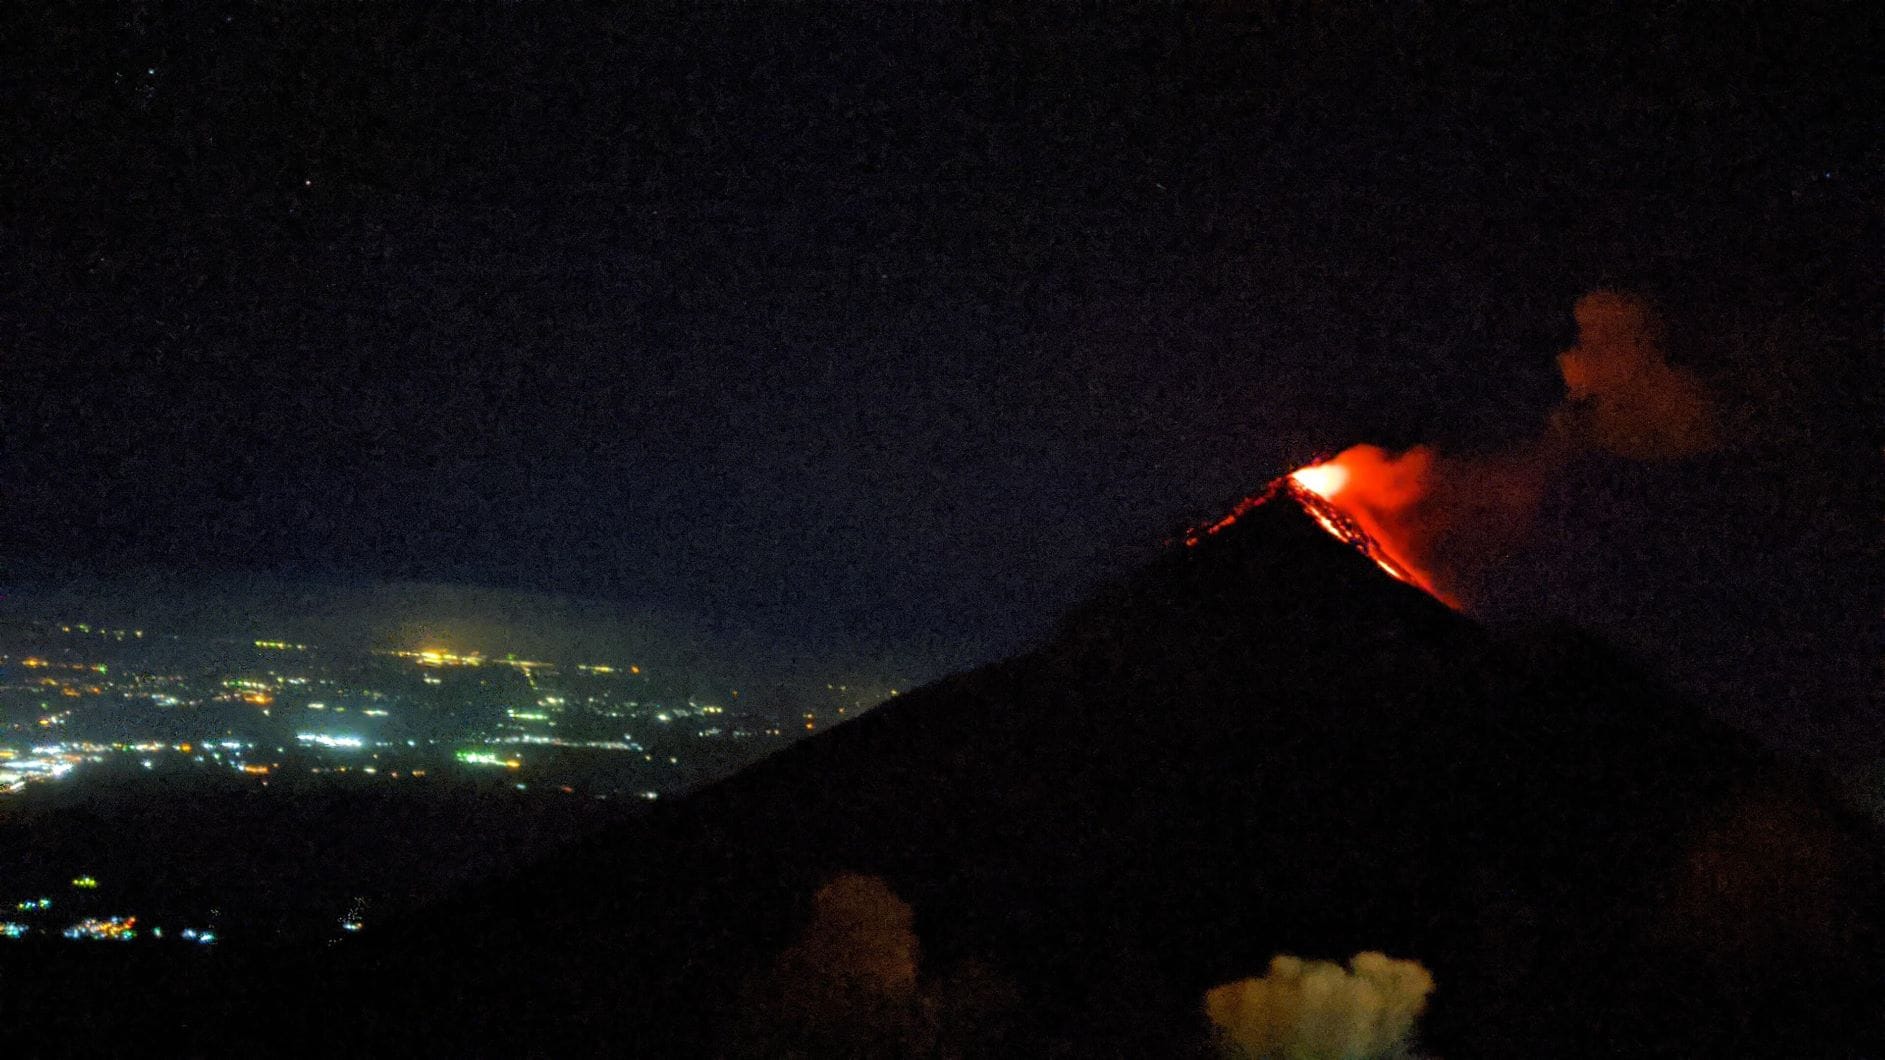 Fuego spewing lava view from acatenango volcano at night